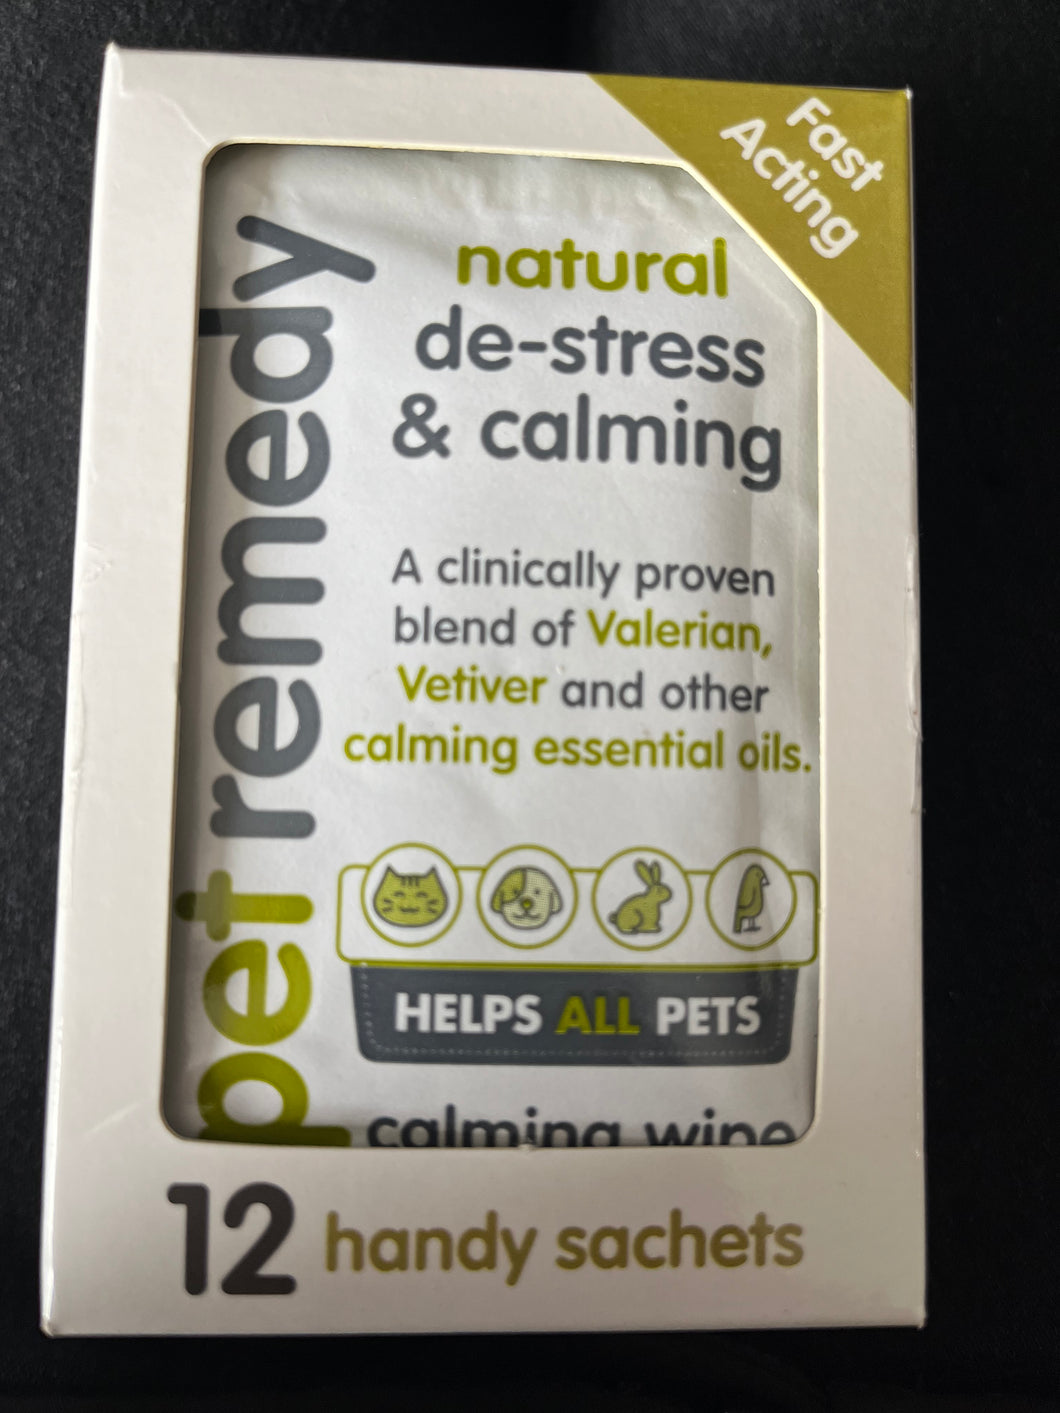 Pet Remedy Calming Wipes 12 Pack 4 - Ex 09-23